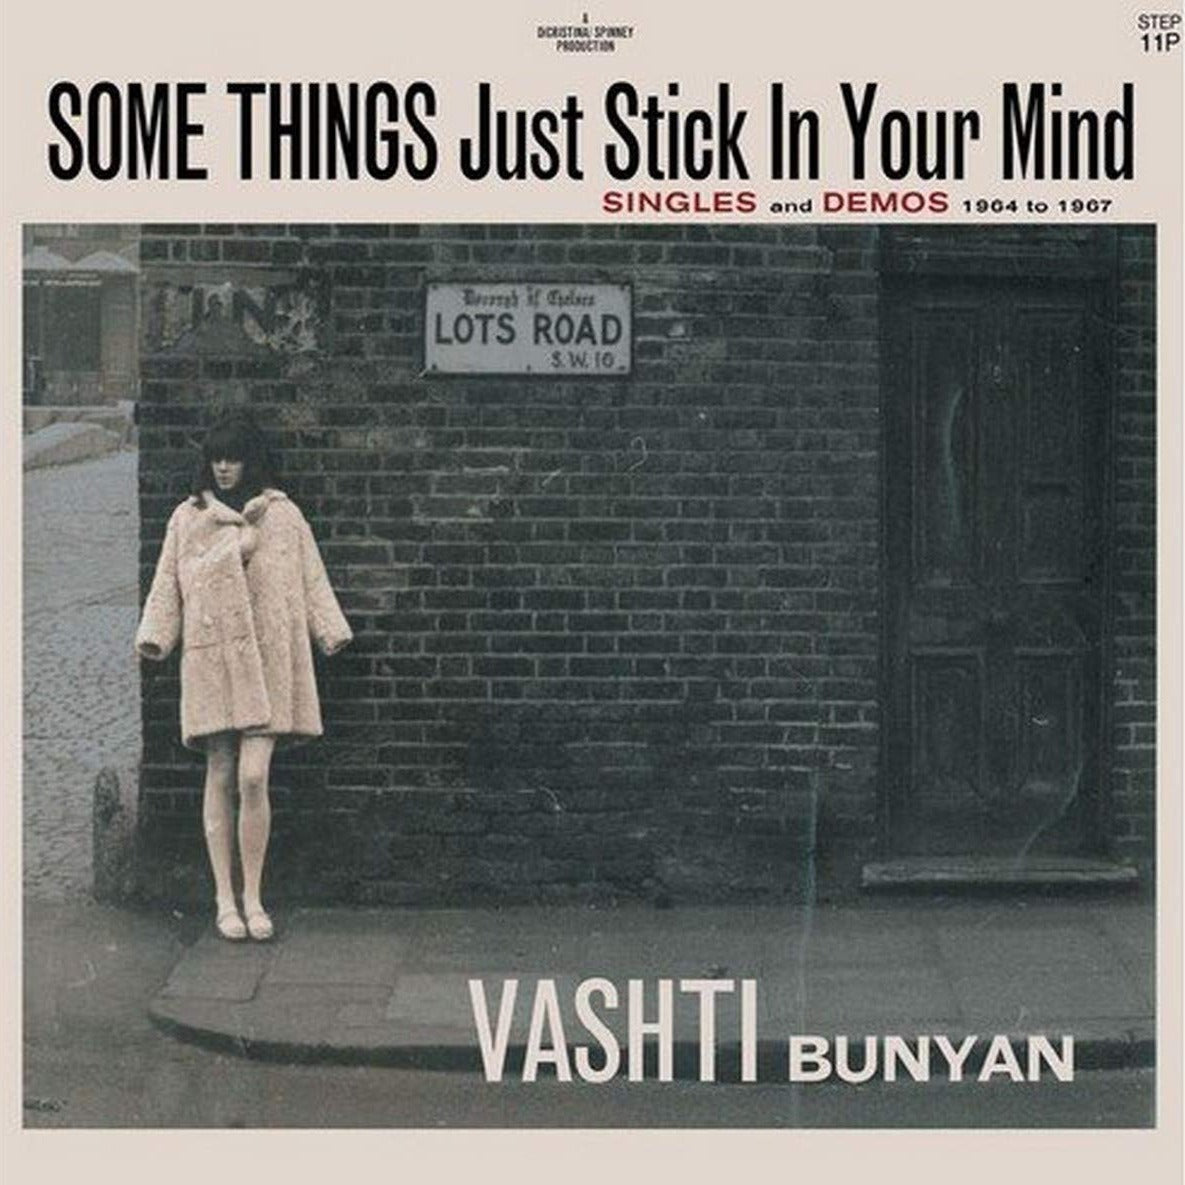 Vashti Bunyan ‎– Some Things Just Stick In Your Mind (Singles And Demos 1964 To 1967)